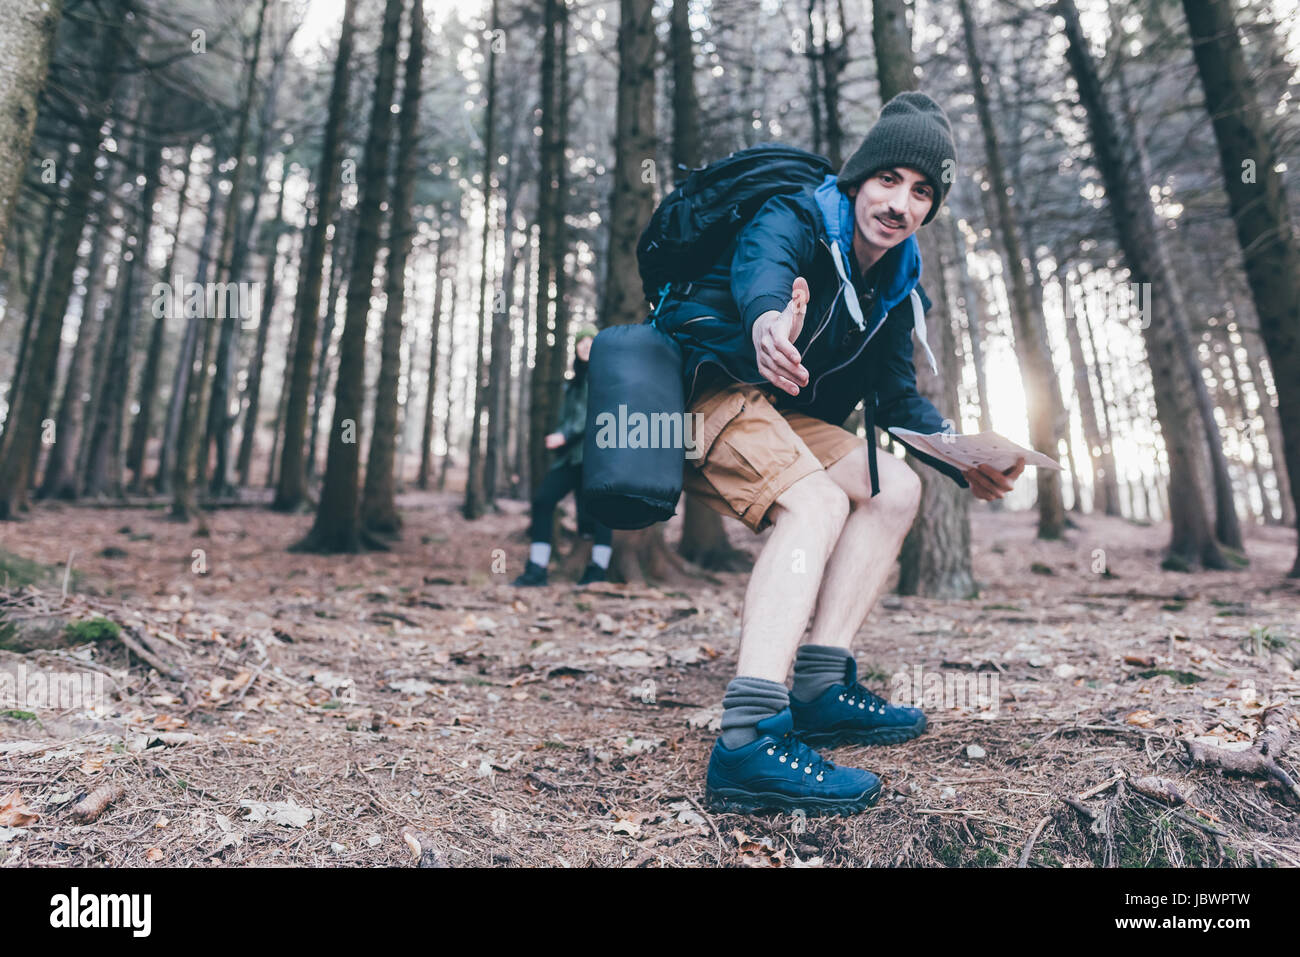 Man hiking in steep forest offering a helping hand, Monte San Primo, Italy Stock Photo